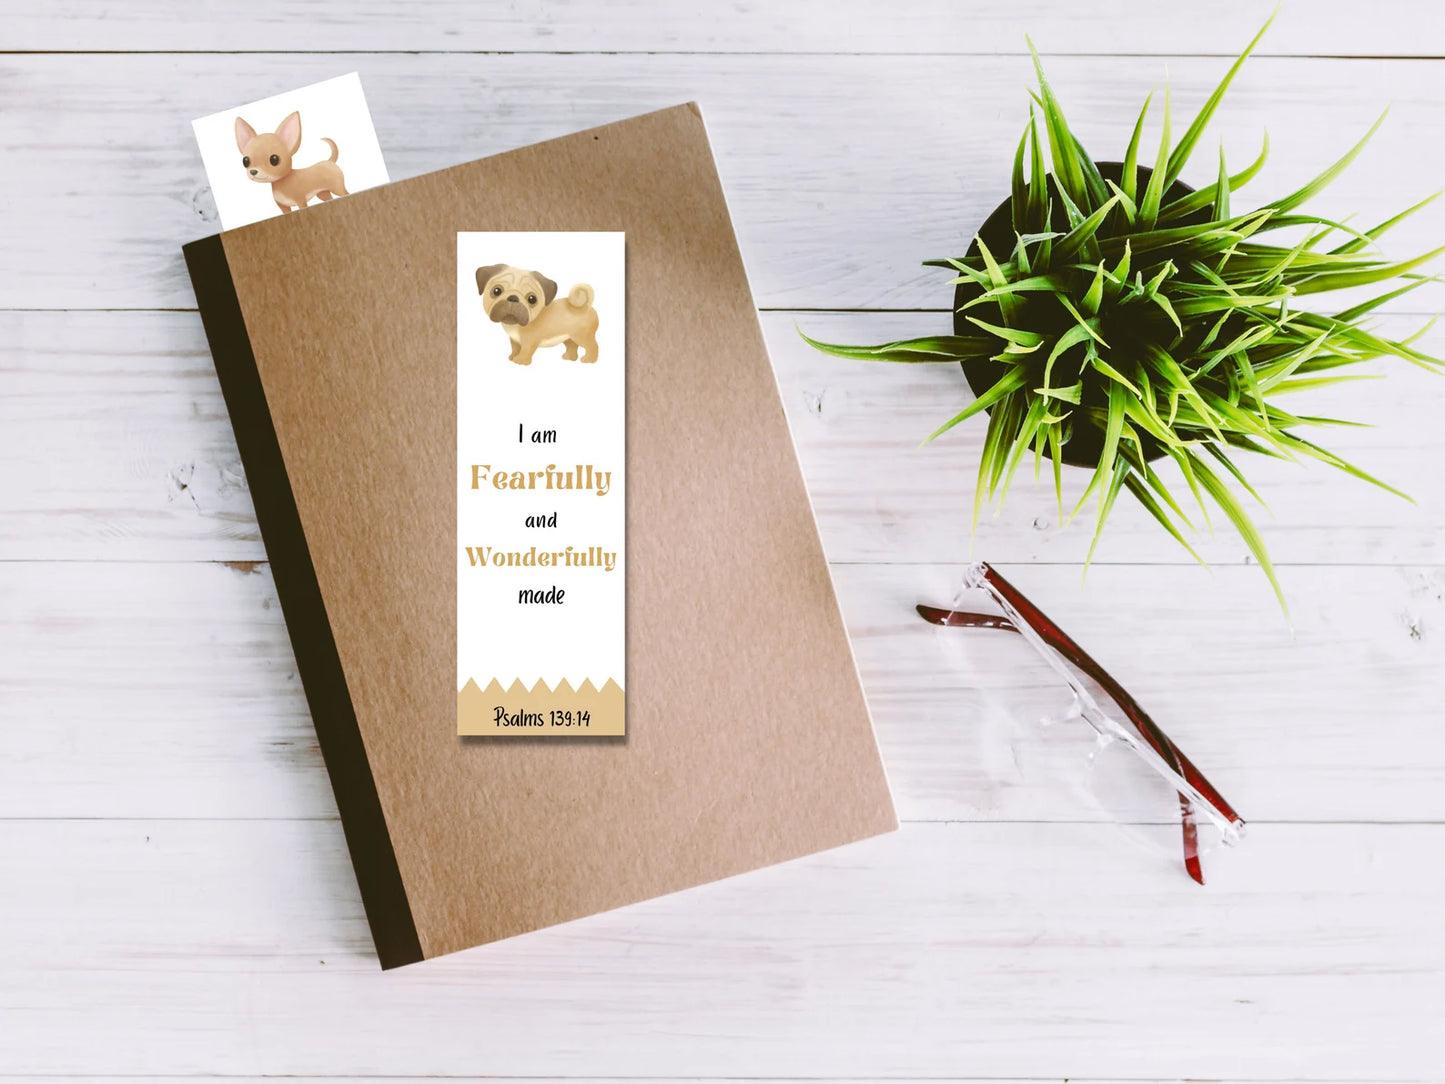 Bible Verse Bookmarks with Dogs